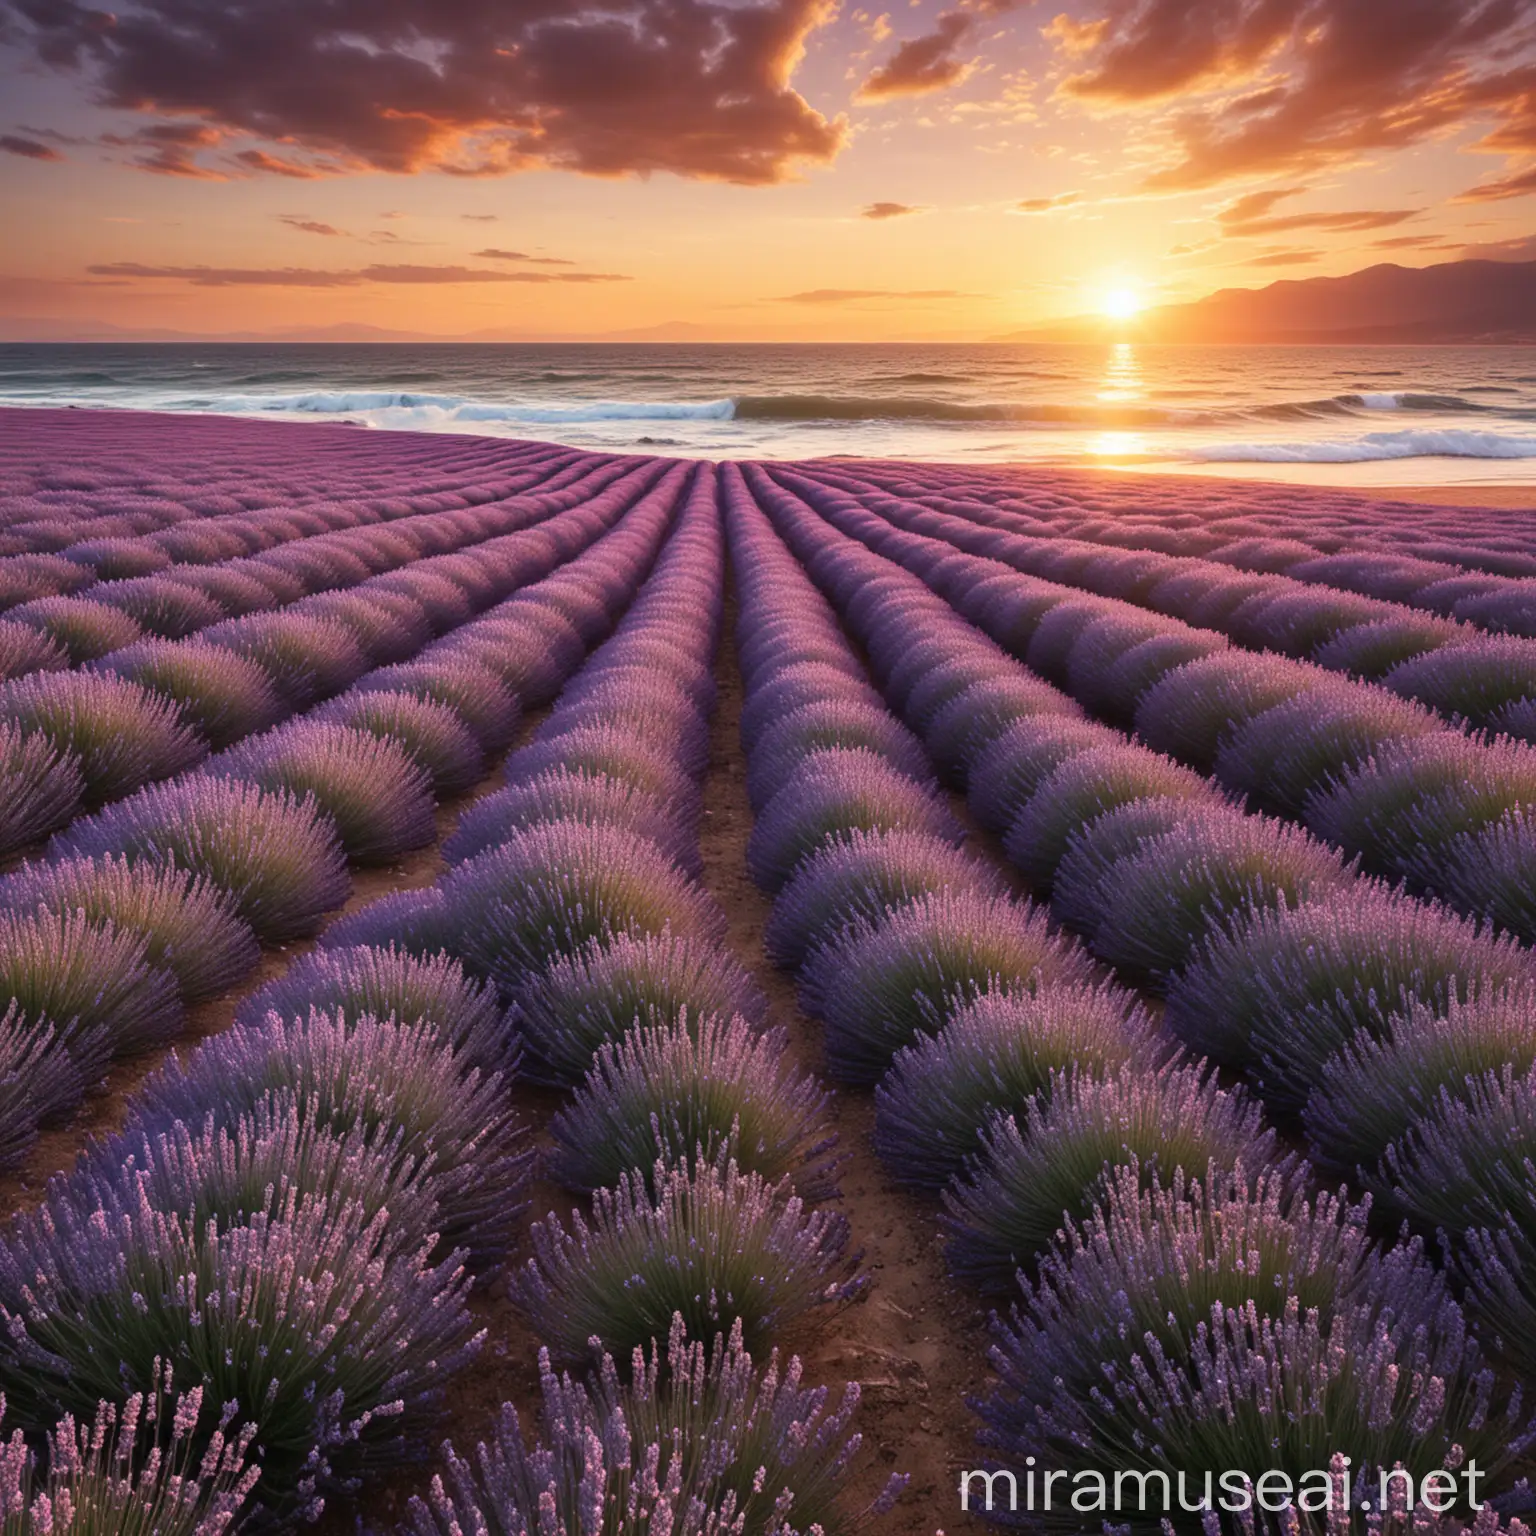 Serene Sunset Over Lavender Fields by the Turbulent Sea